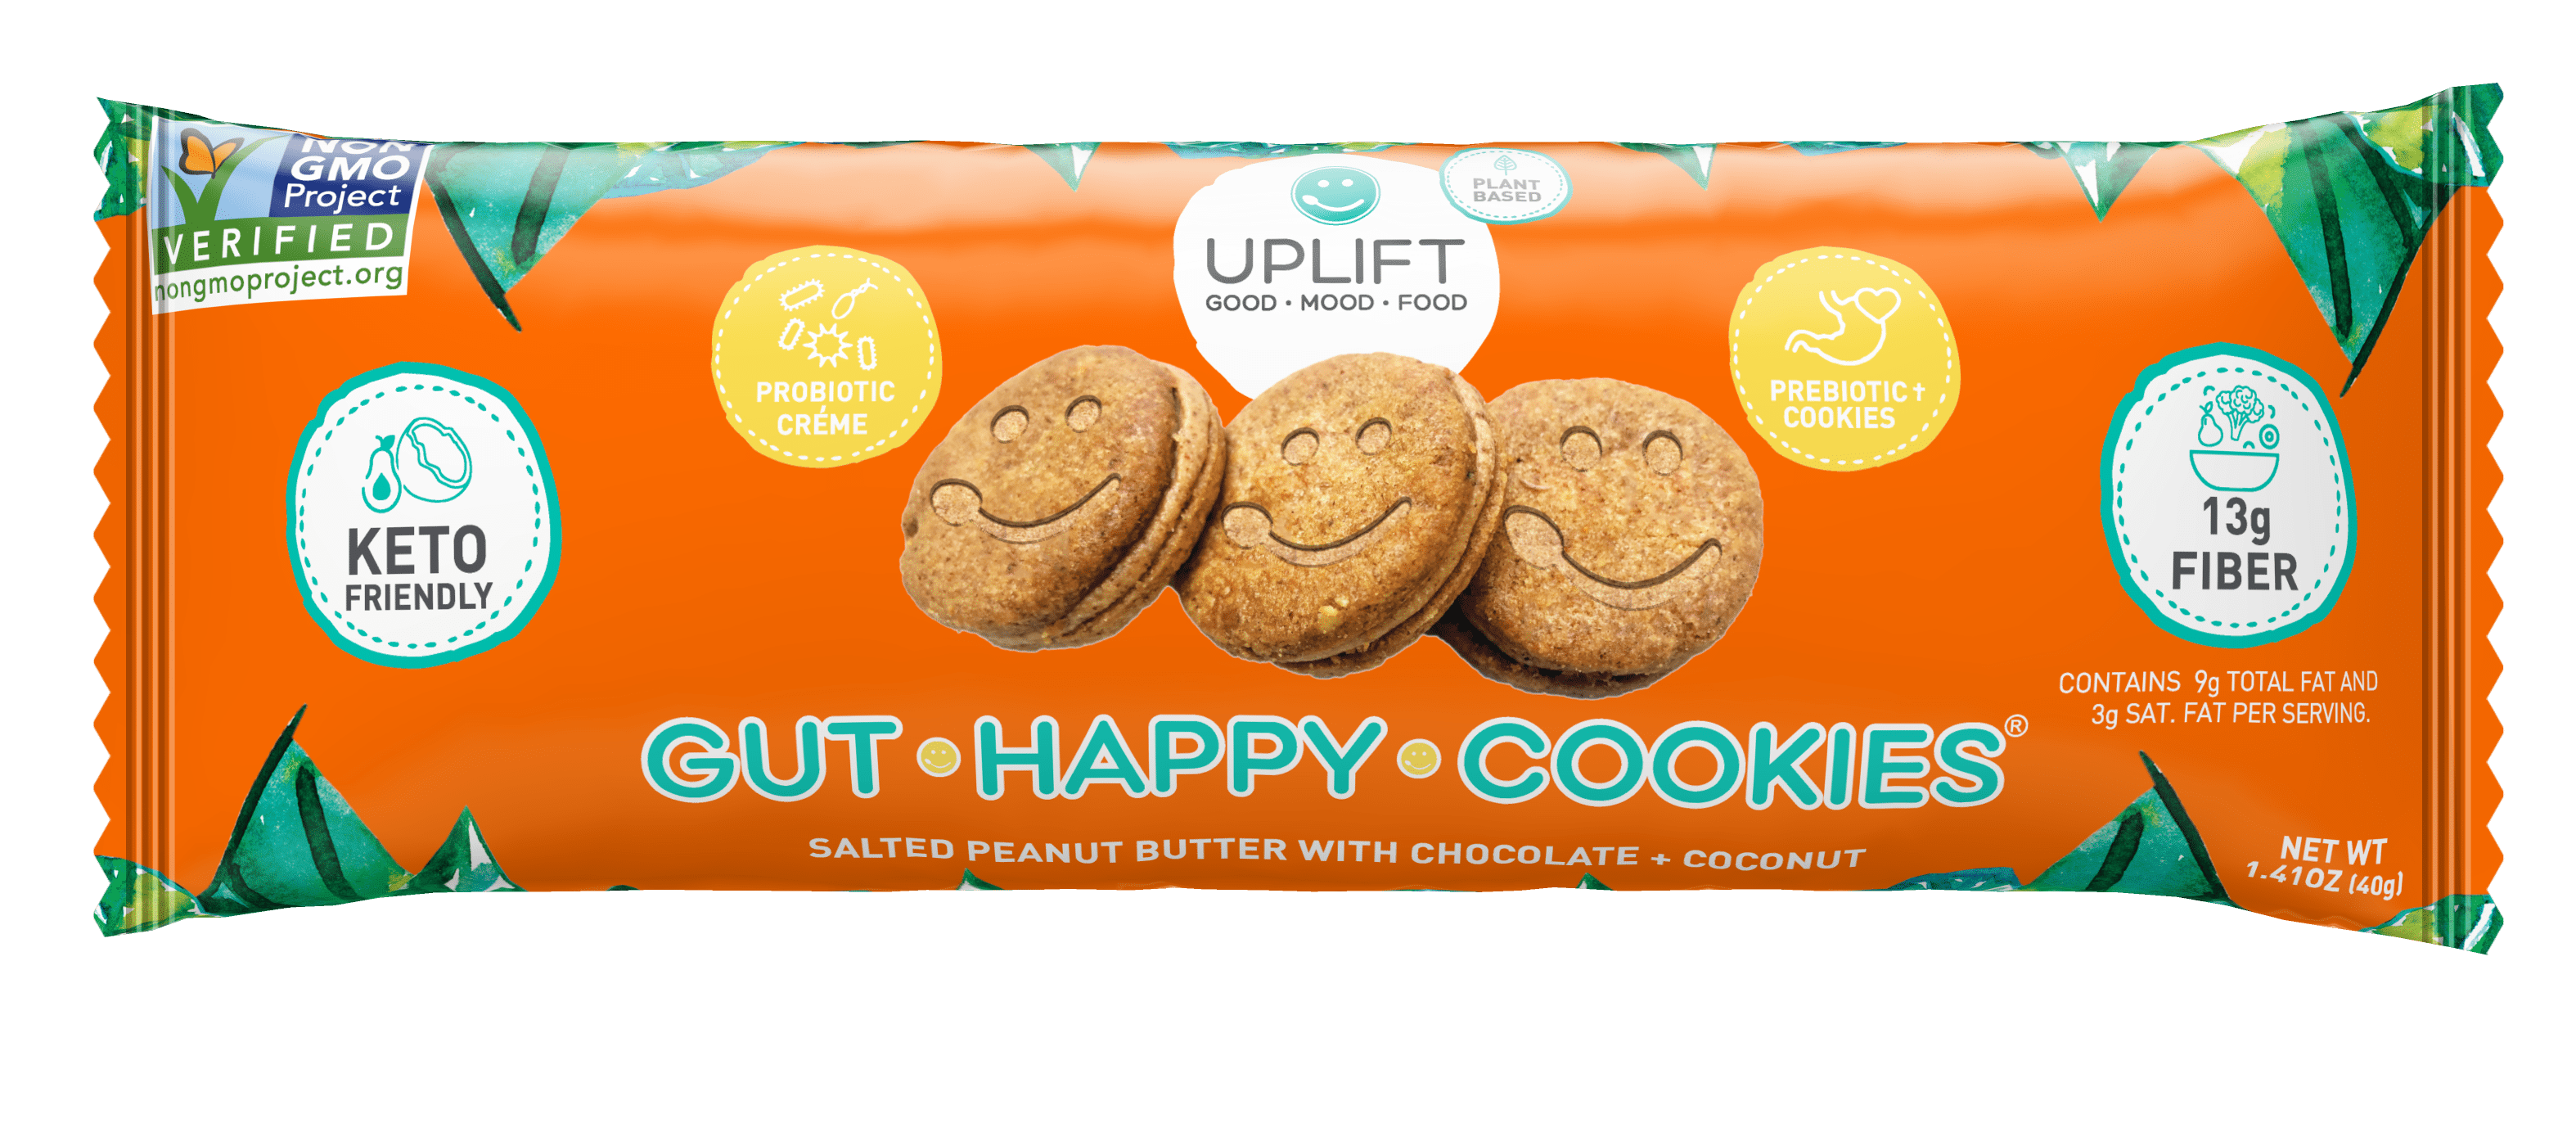 Uplift Food Gut Happy Cookies: Salted Peanut Butter w/ Chocolate + Coconut 36 units per case 1.5 oz